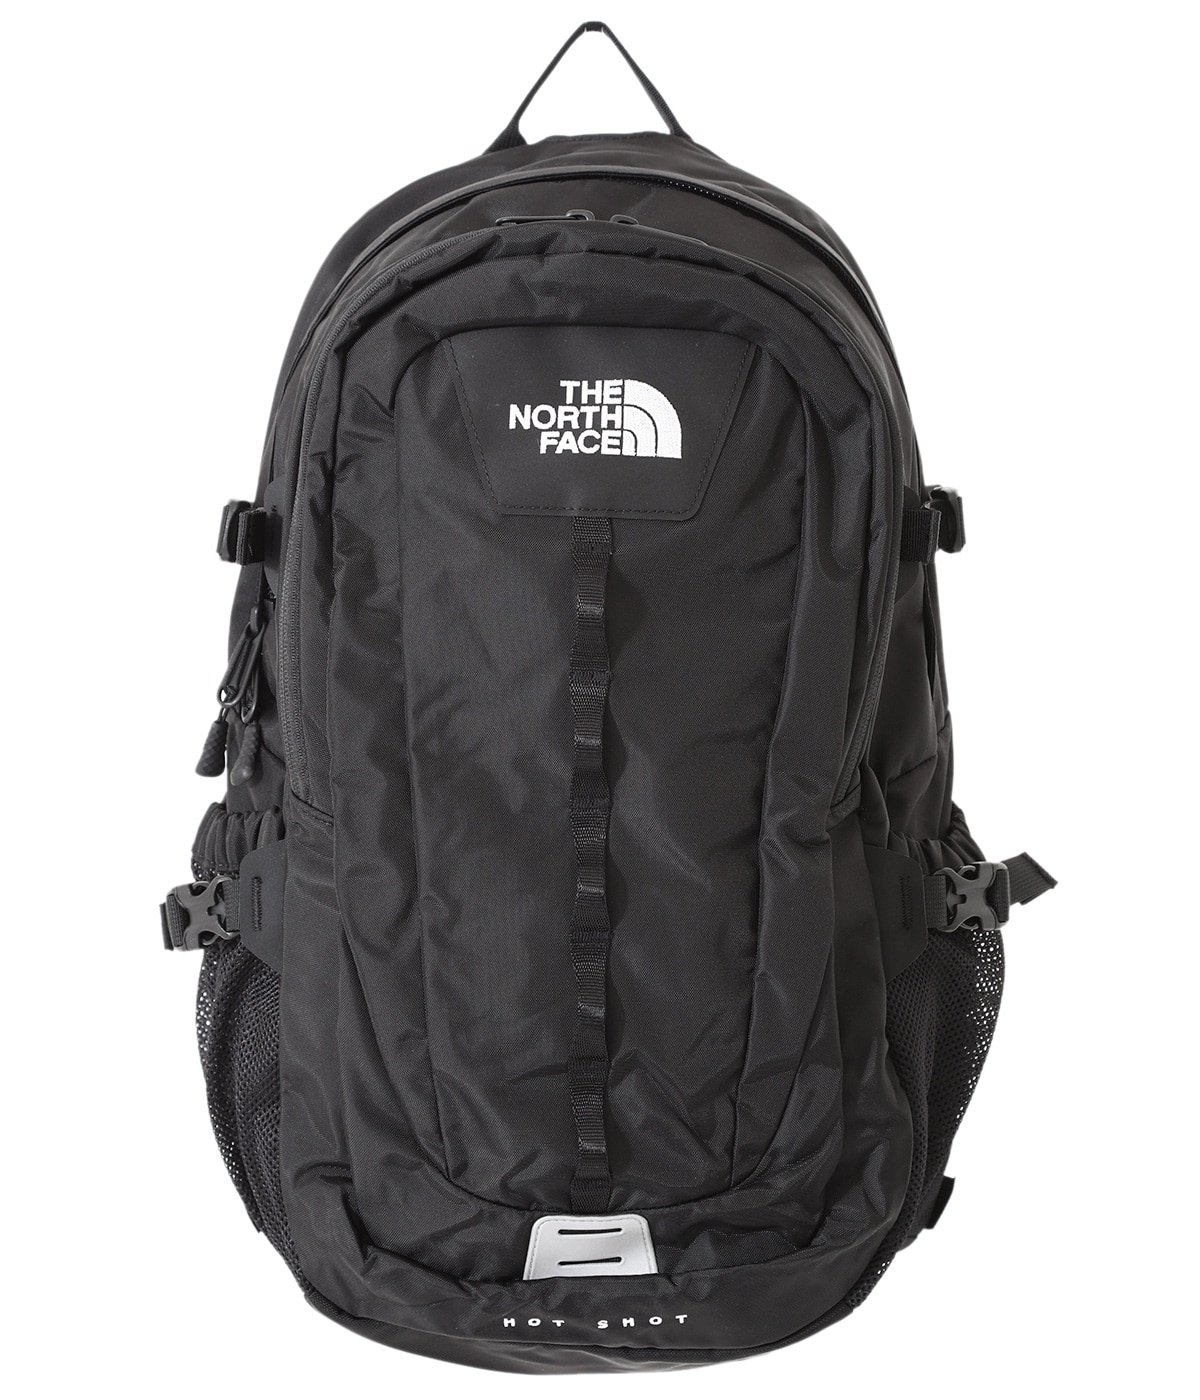 THE NORTH FACE HOT SHOTバックパック【送料込み】